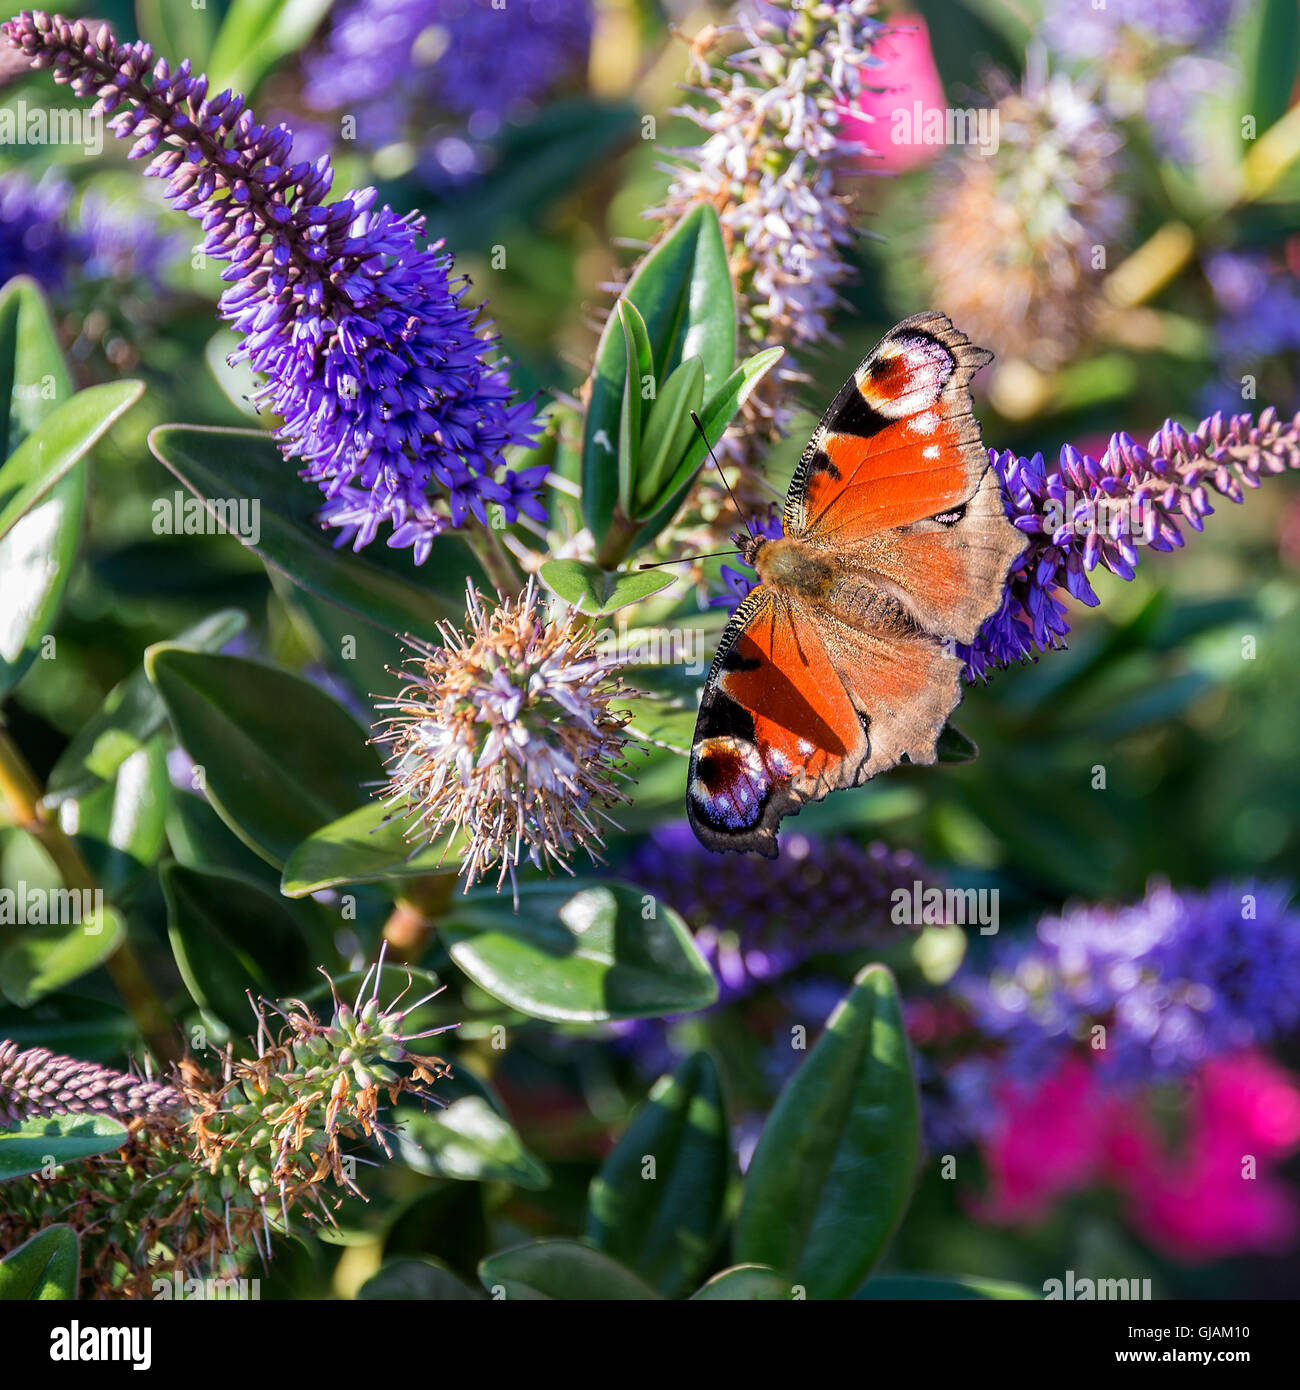 A Beautiful Peacock Butterfly on a Blue Hebe Flower in a Garden at Alsager Cheshire England United Kingdom UK Stock Photo